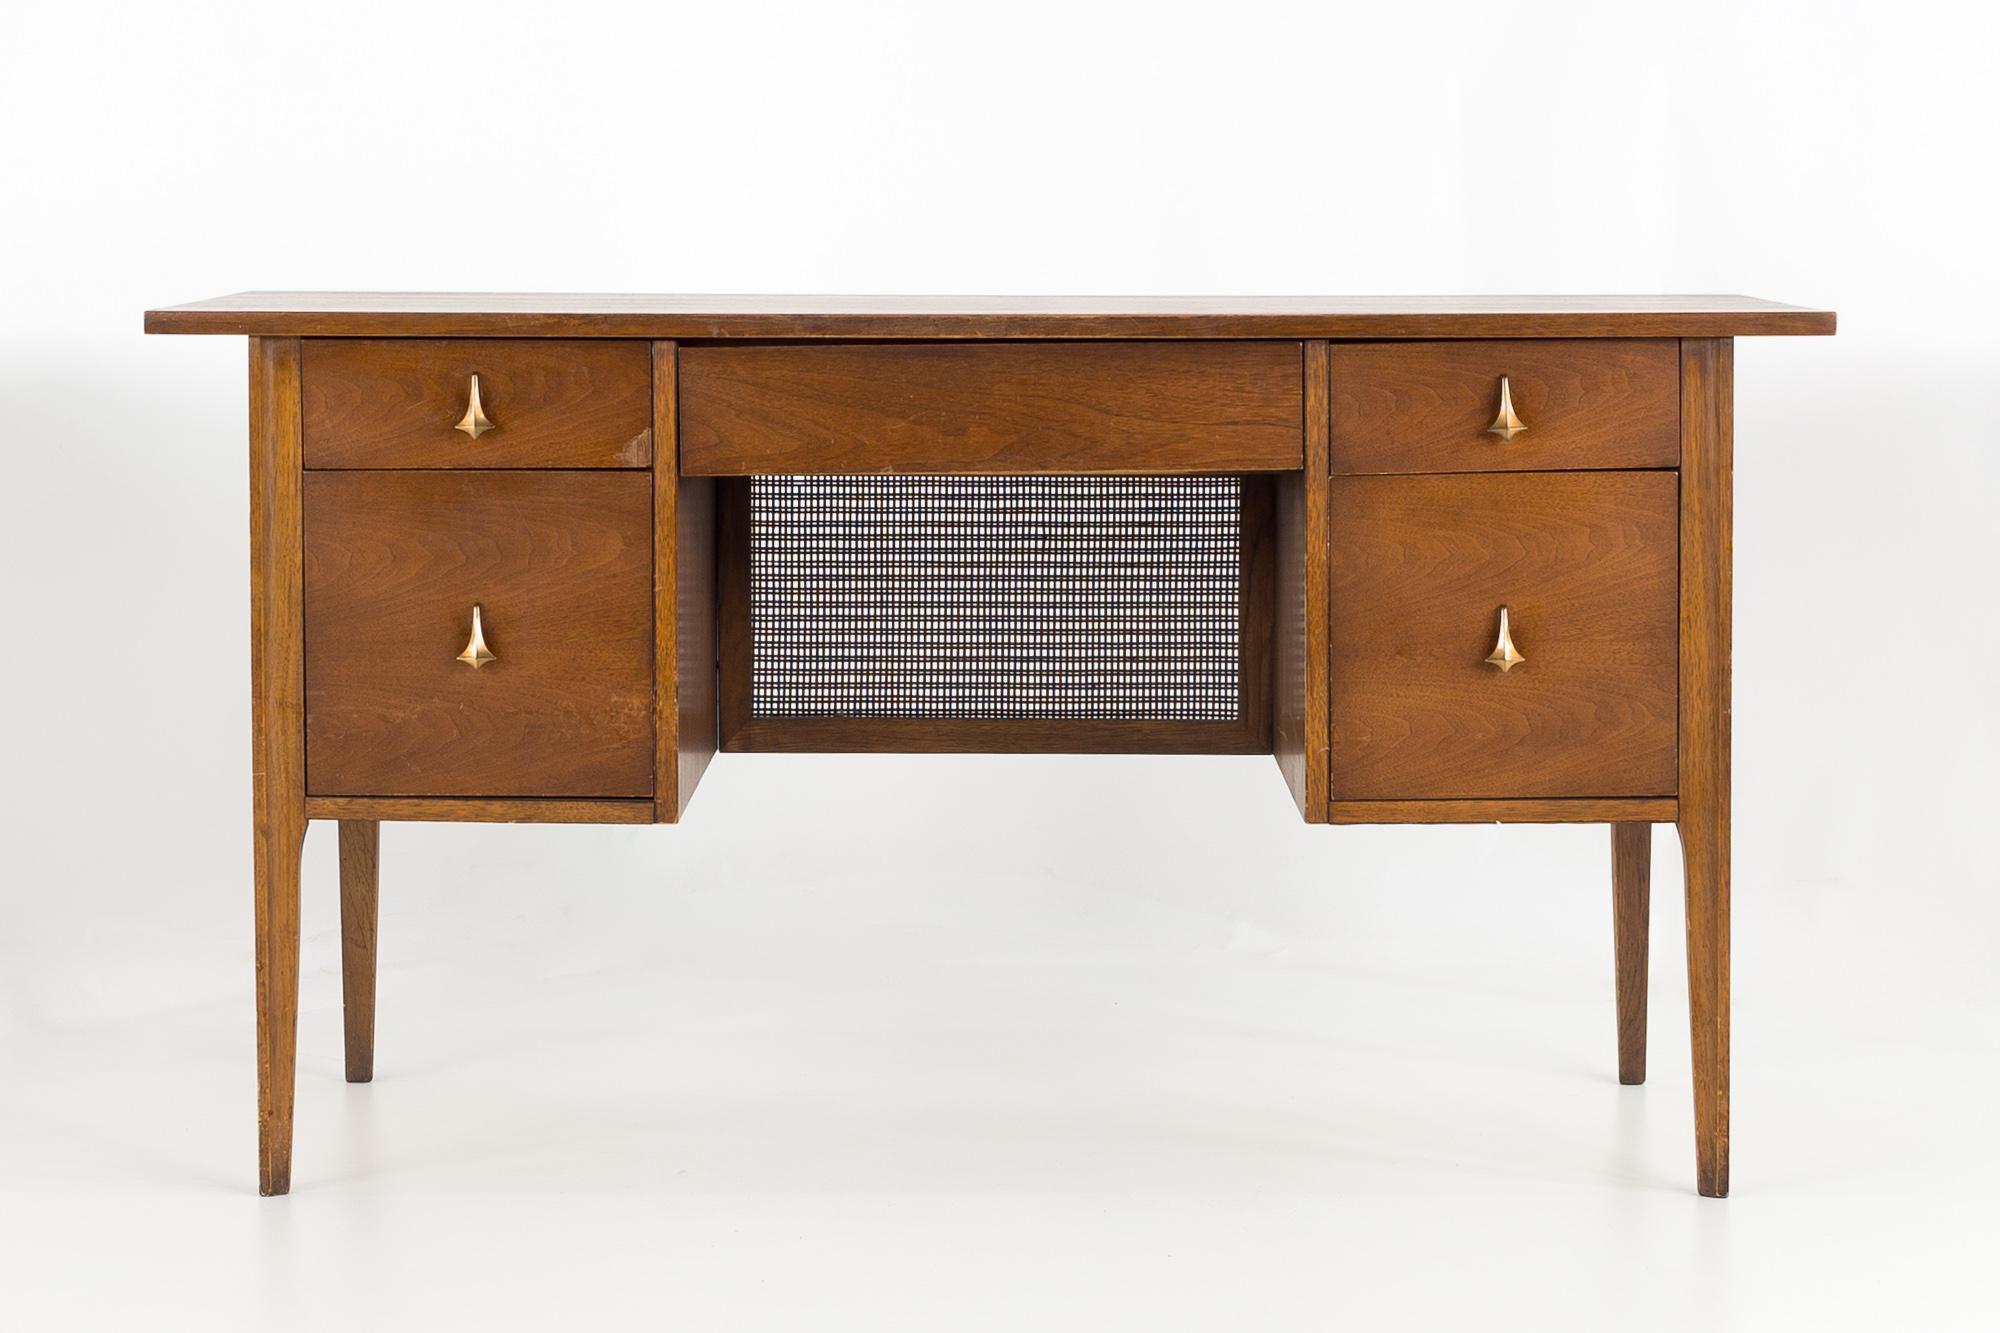 Broyhill Brasilia Mid Century walnut executive desk

Measures: 56 long x 23.25 deep x 30 high
Knee hole is 21 wide x 22 deep x 24.5 high

All pieces of furniture can be had in what we call restored vintage condition. This means the piece is restored